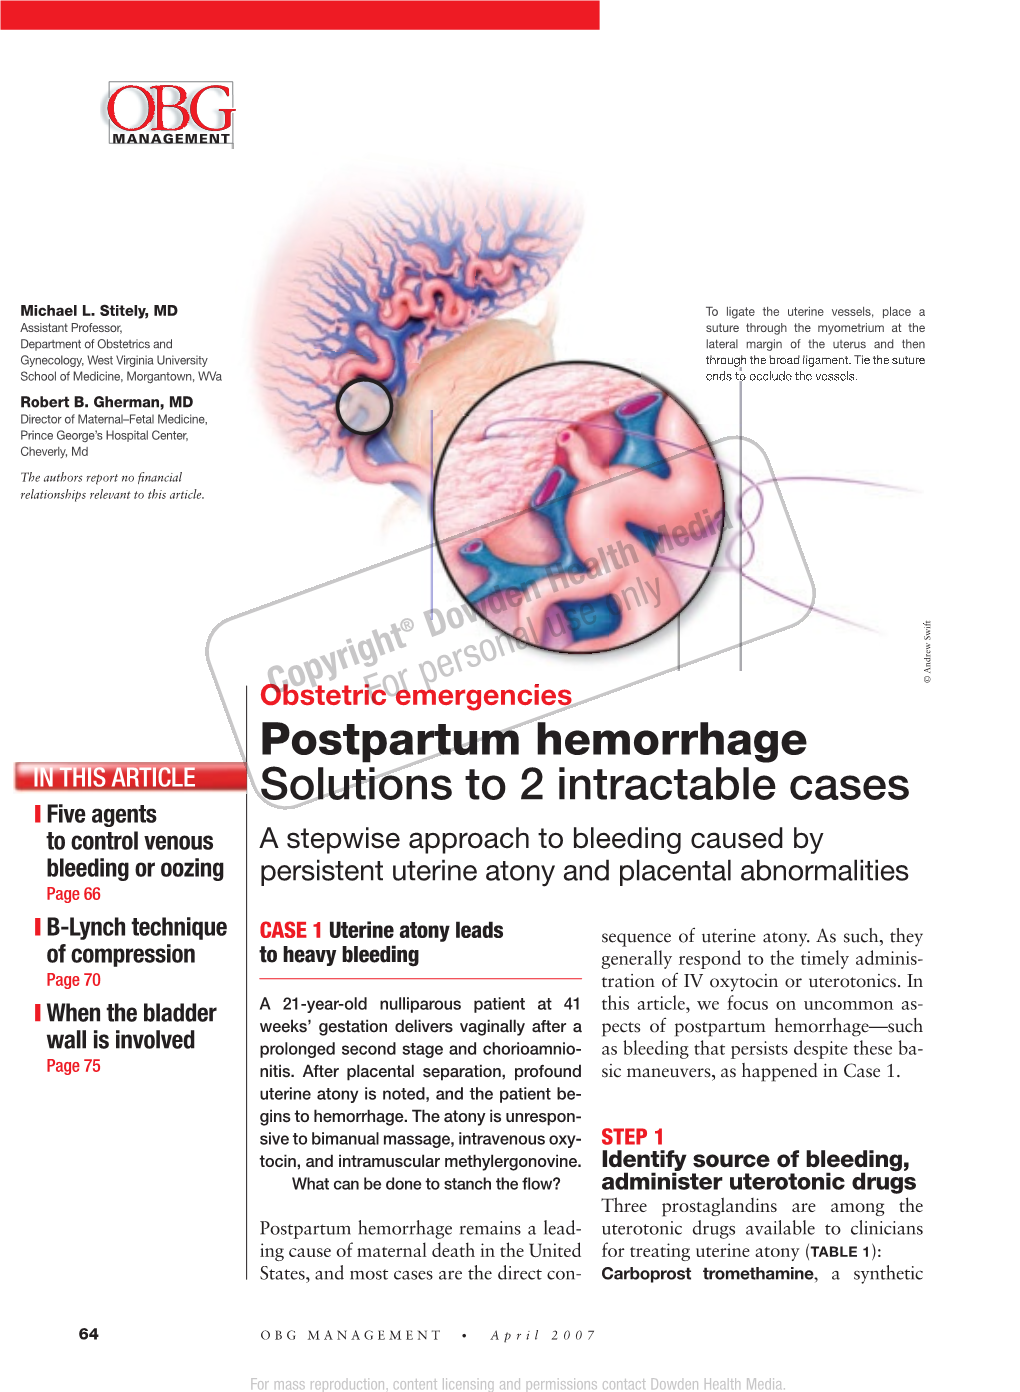 Postpartum Hemorrhage Solutions to 2 Intractable Cases